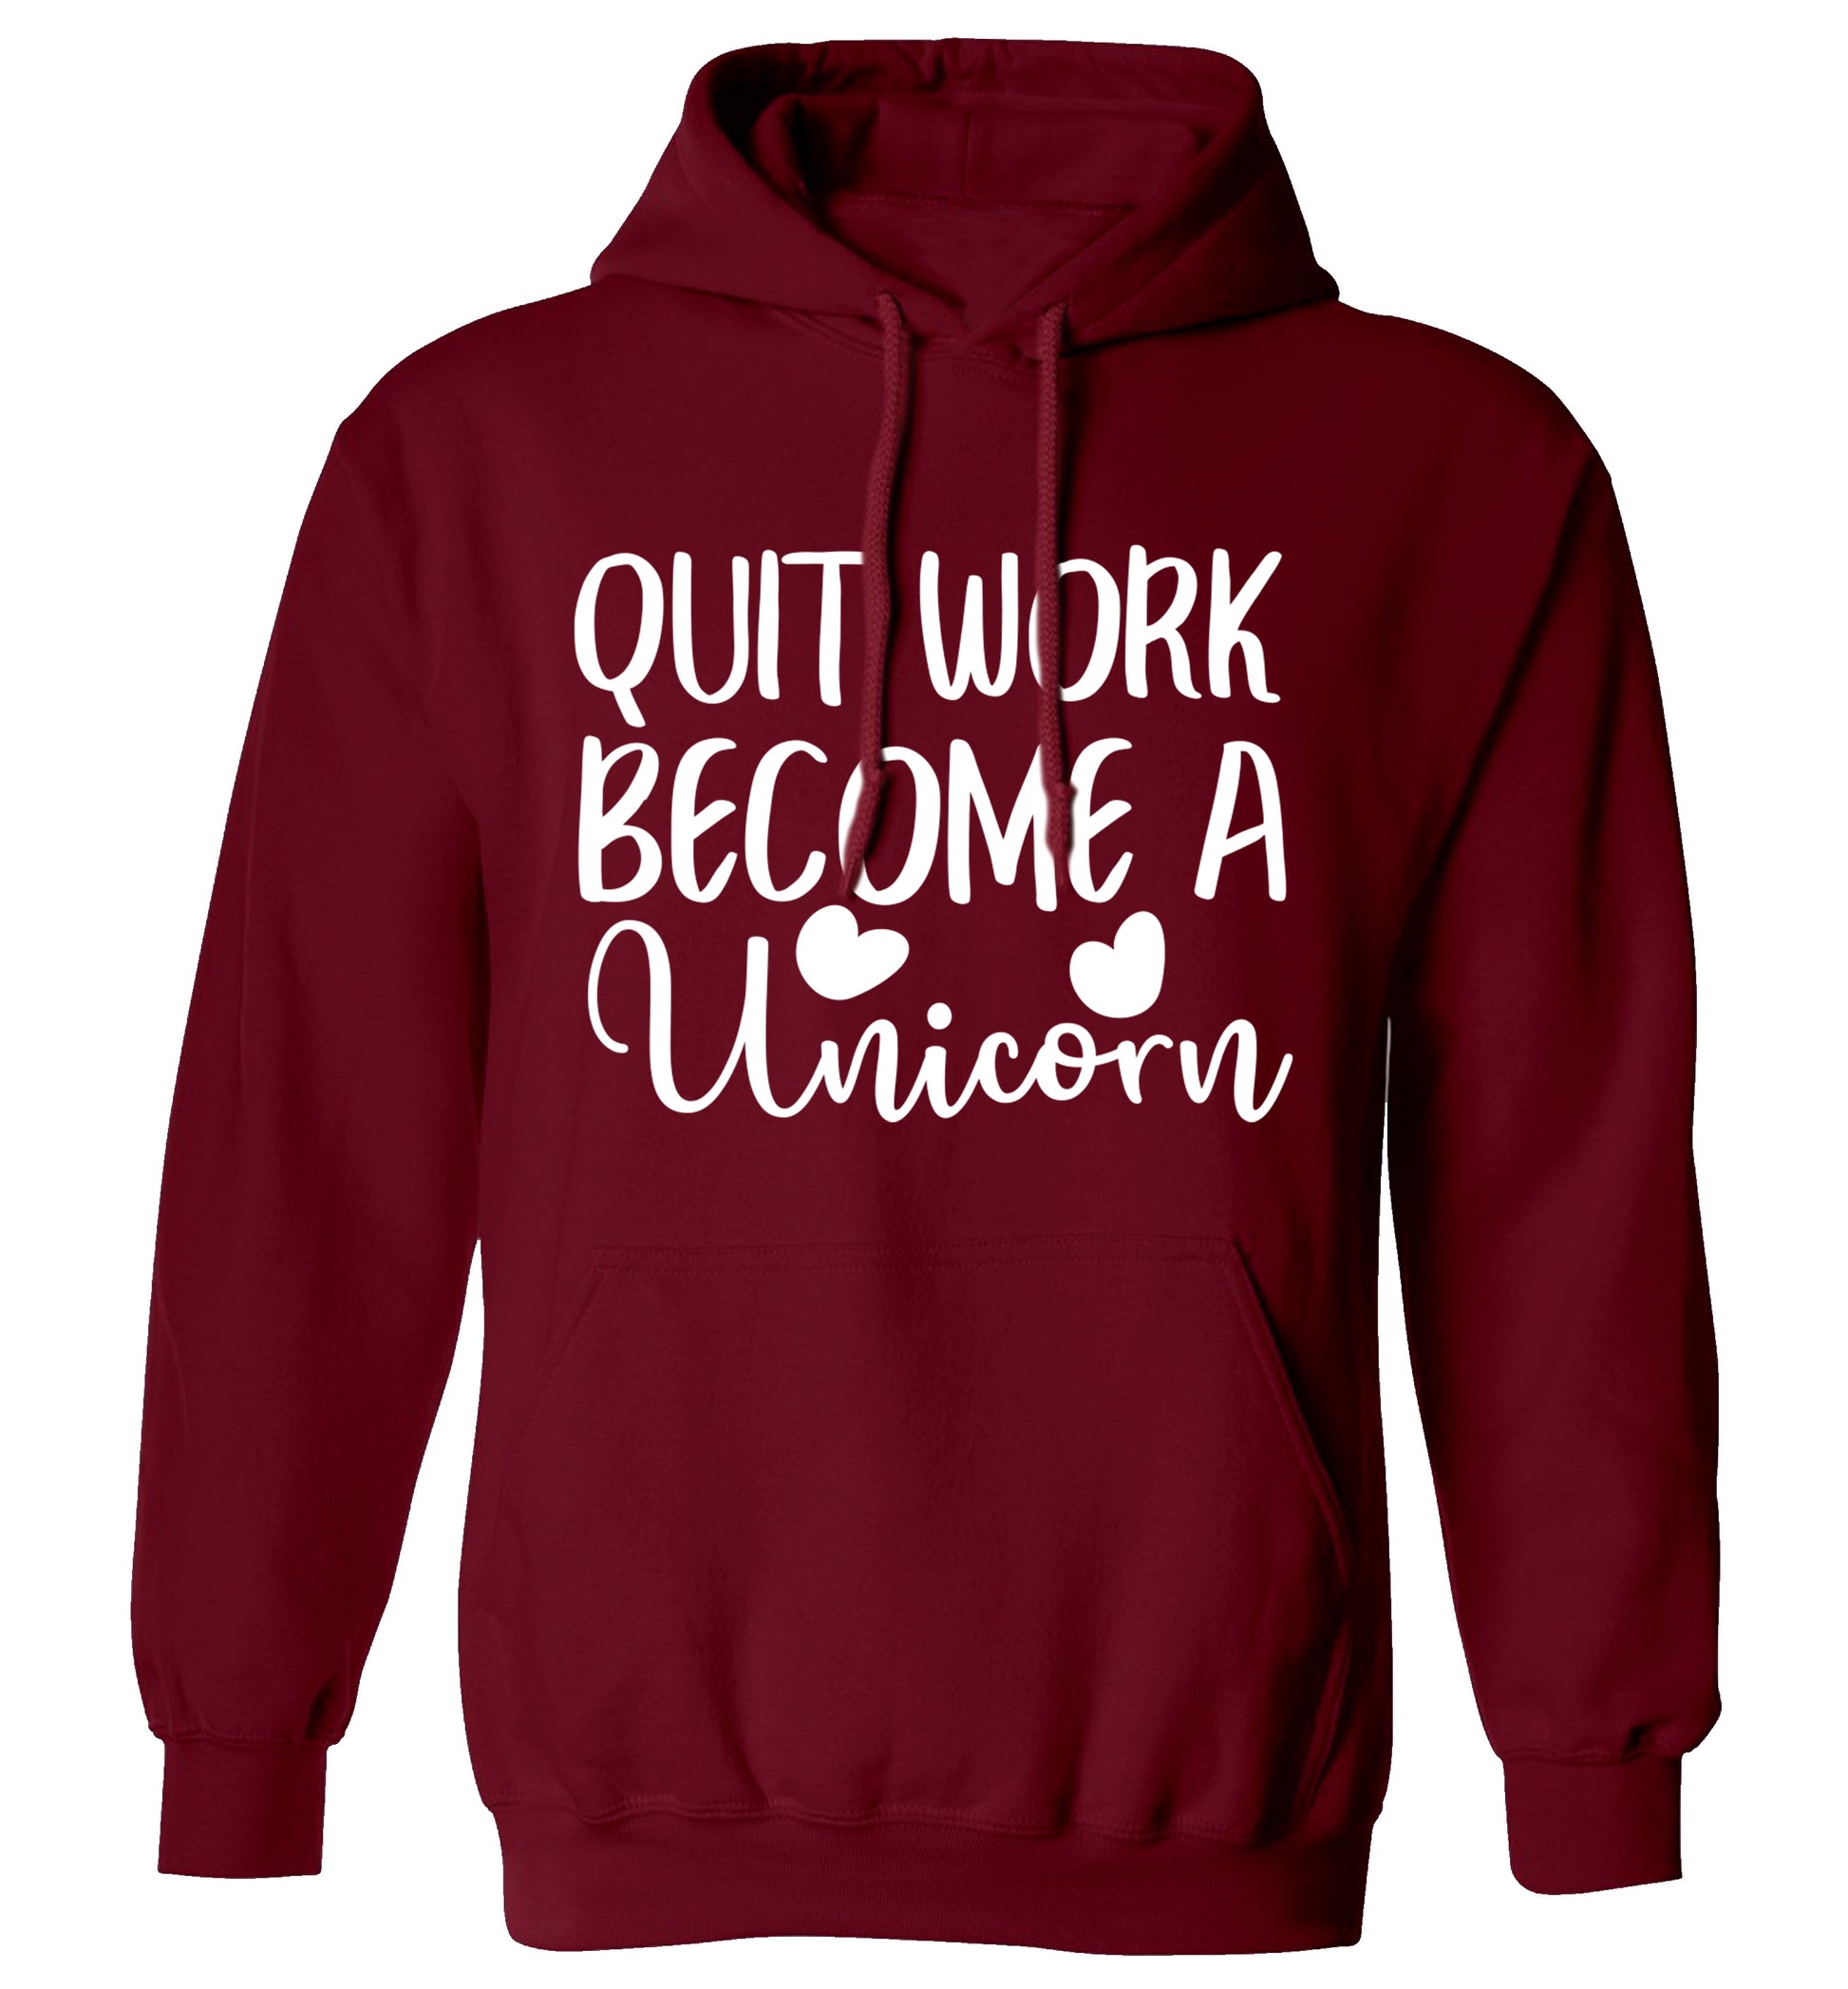 Quit work become a unicorn adults unisex maroon hoodie 2XL